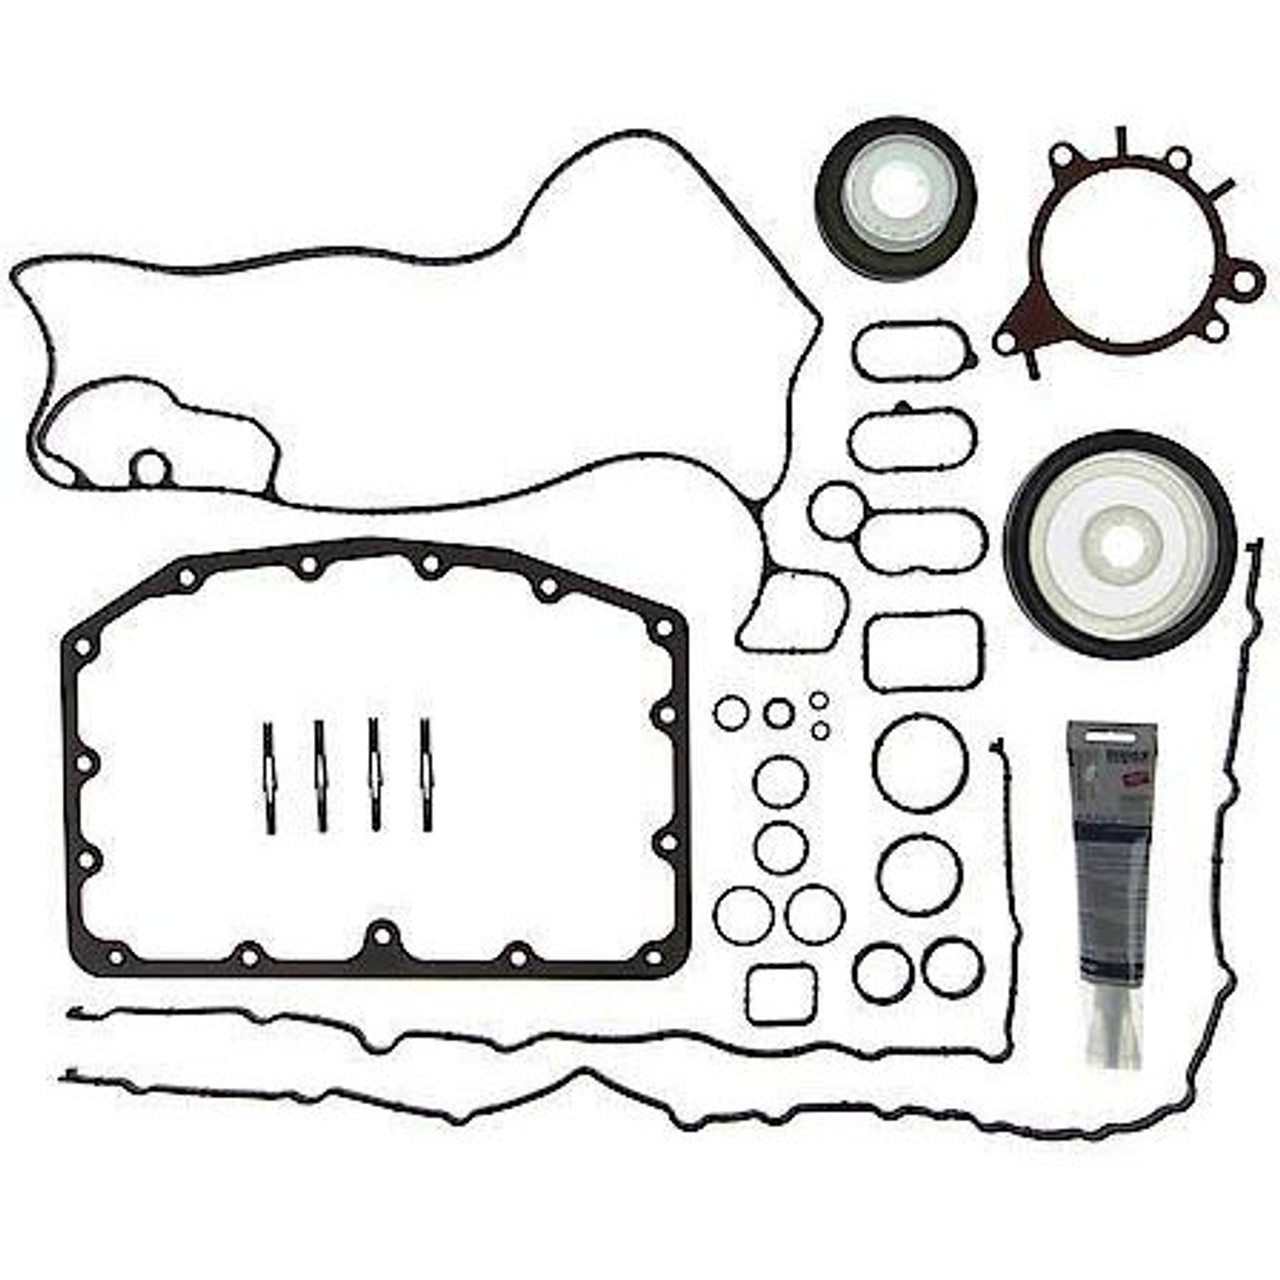 Mahle Lower Engine Gasket Set 2015 to 2019 6.7L Powerstroke (MCICS54886A)-Main View